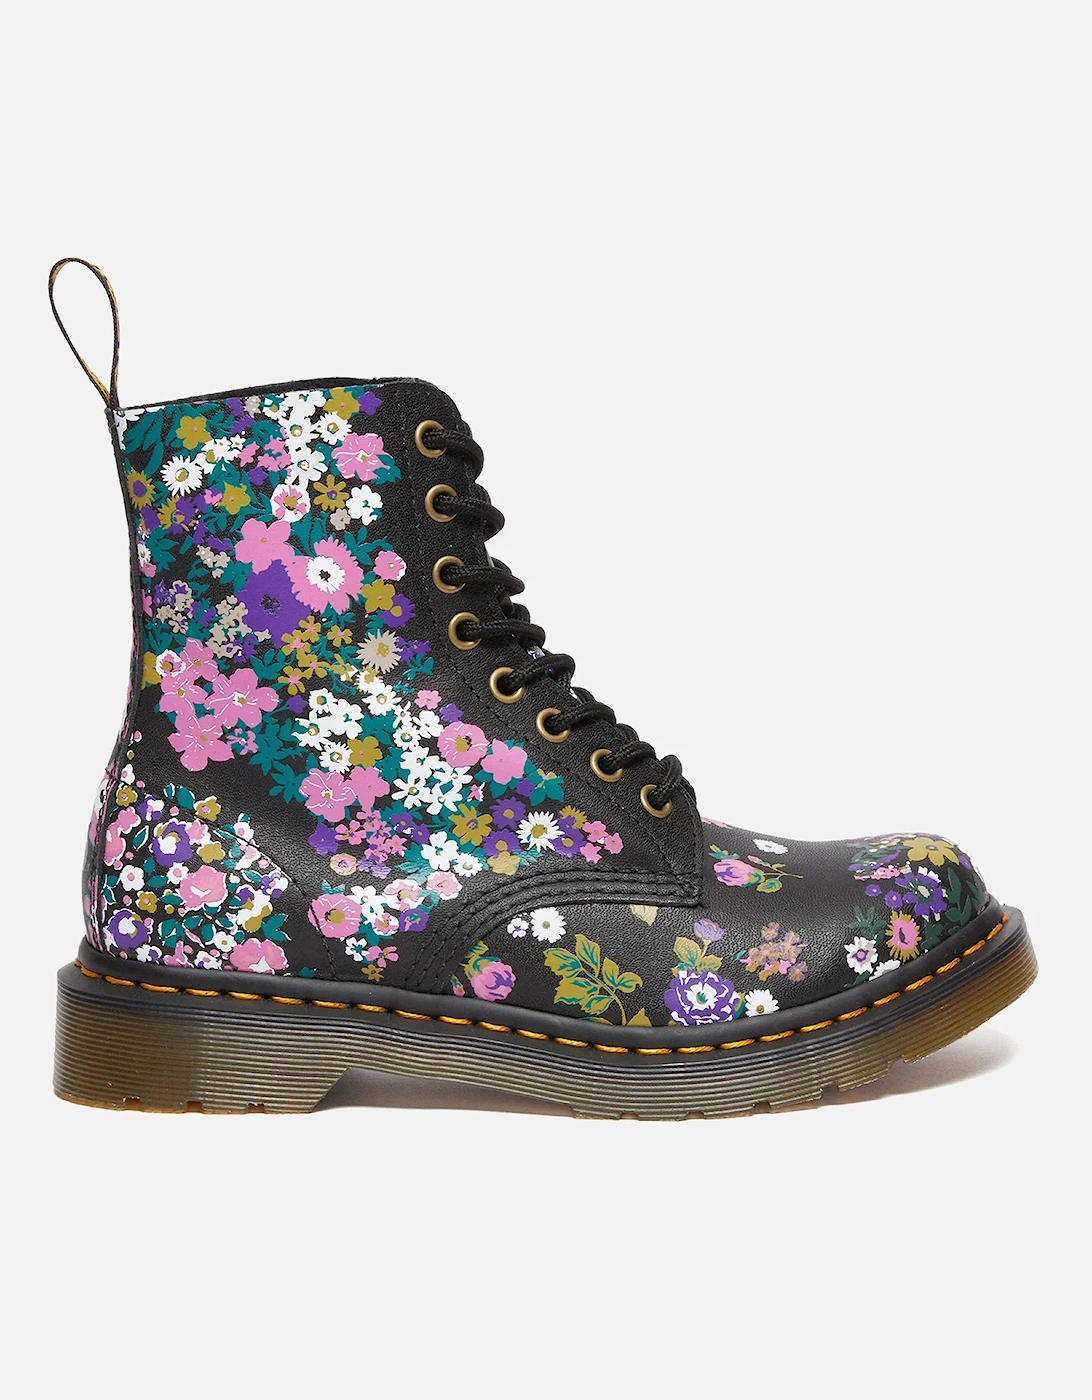 Dr. Martens Women's 1460 Pascal Leather 8-Eye Boots - Dr. Martens - Home - Women's Shoes - Women's Boots - Dr. Martens Women's 1460 Pascal Leather 8-Eye Boots, 2 of 1